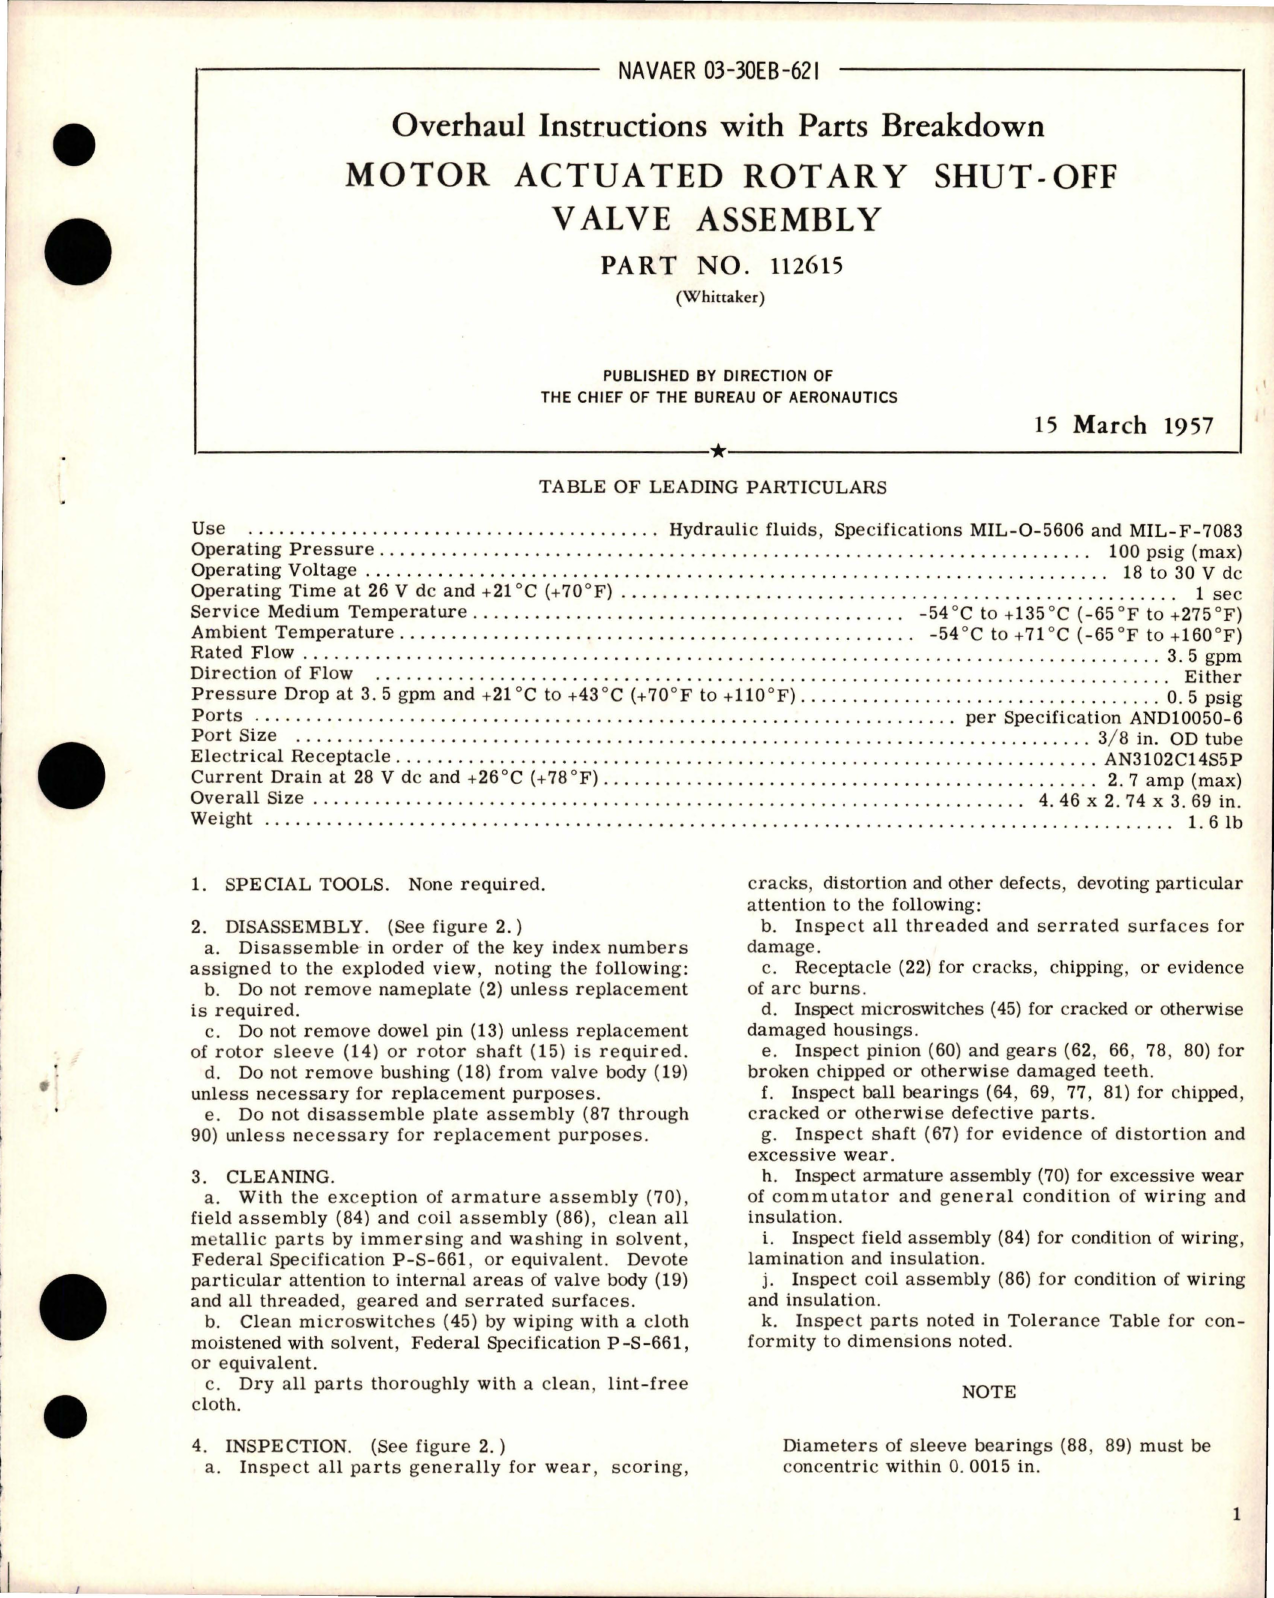 Sample page 1 from AirCorps Library document: Overhaul Instructions with Parts for Motor Actuated Rotary Shut Off Valve Assembly - Part 112615